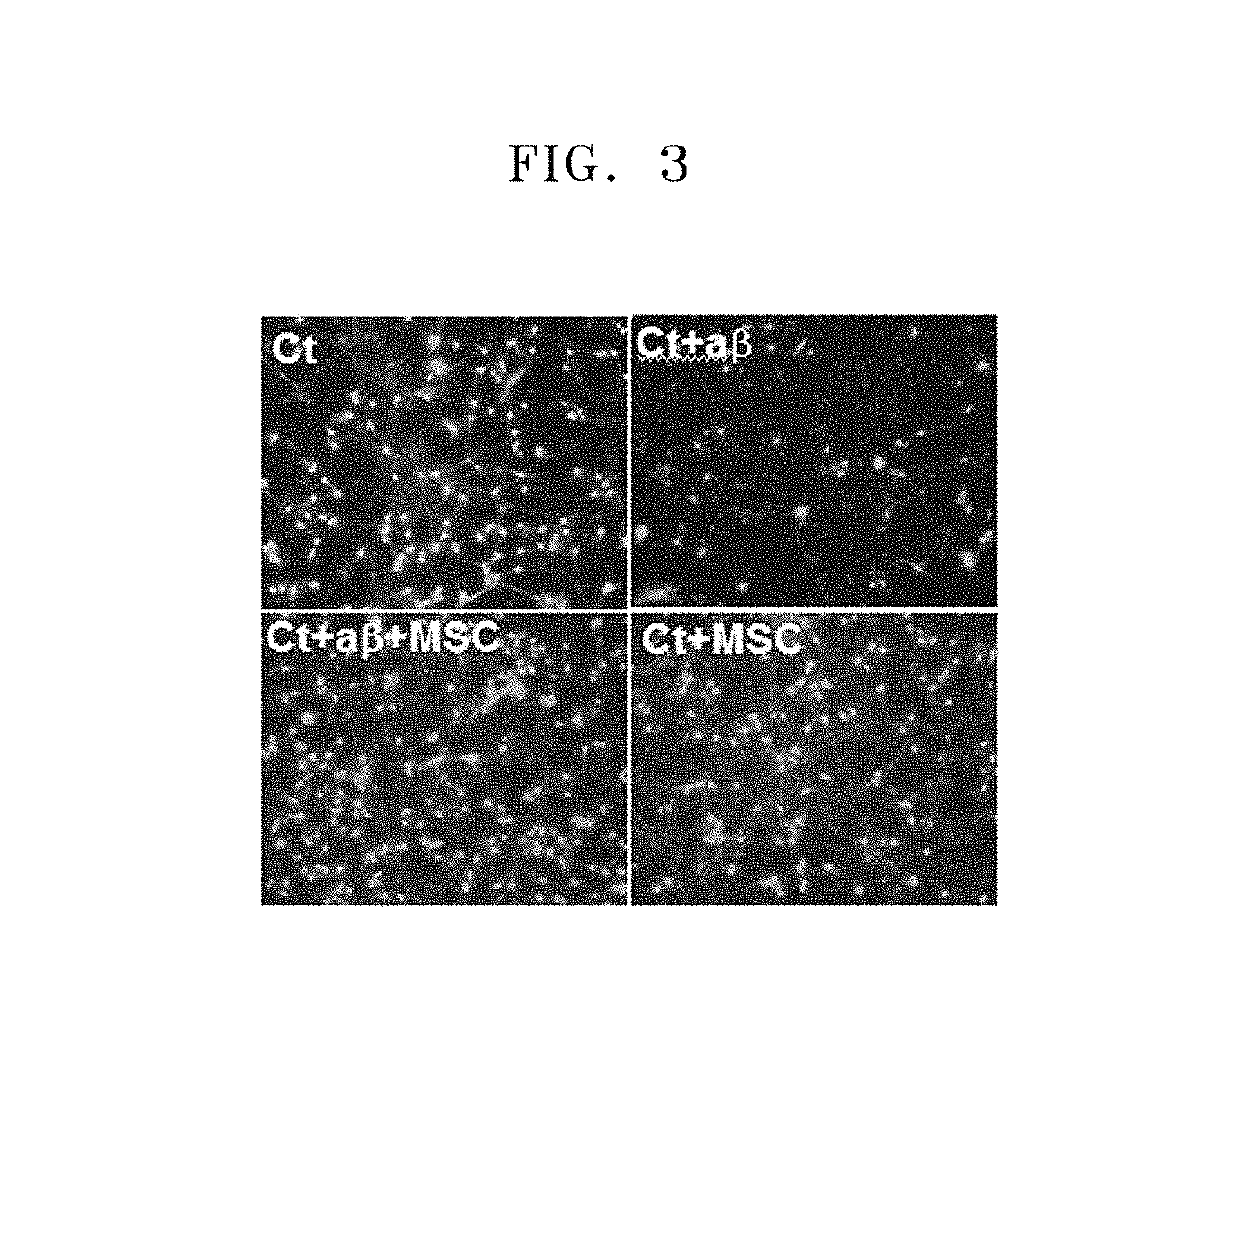 Composition comprising a culture solution of mesenchymal stem cells for the treatment of neural diseases